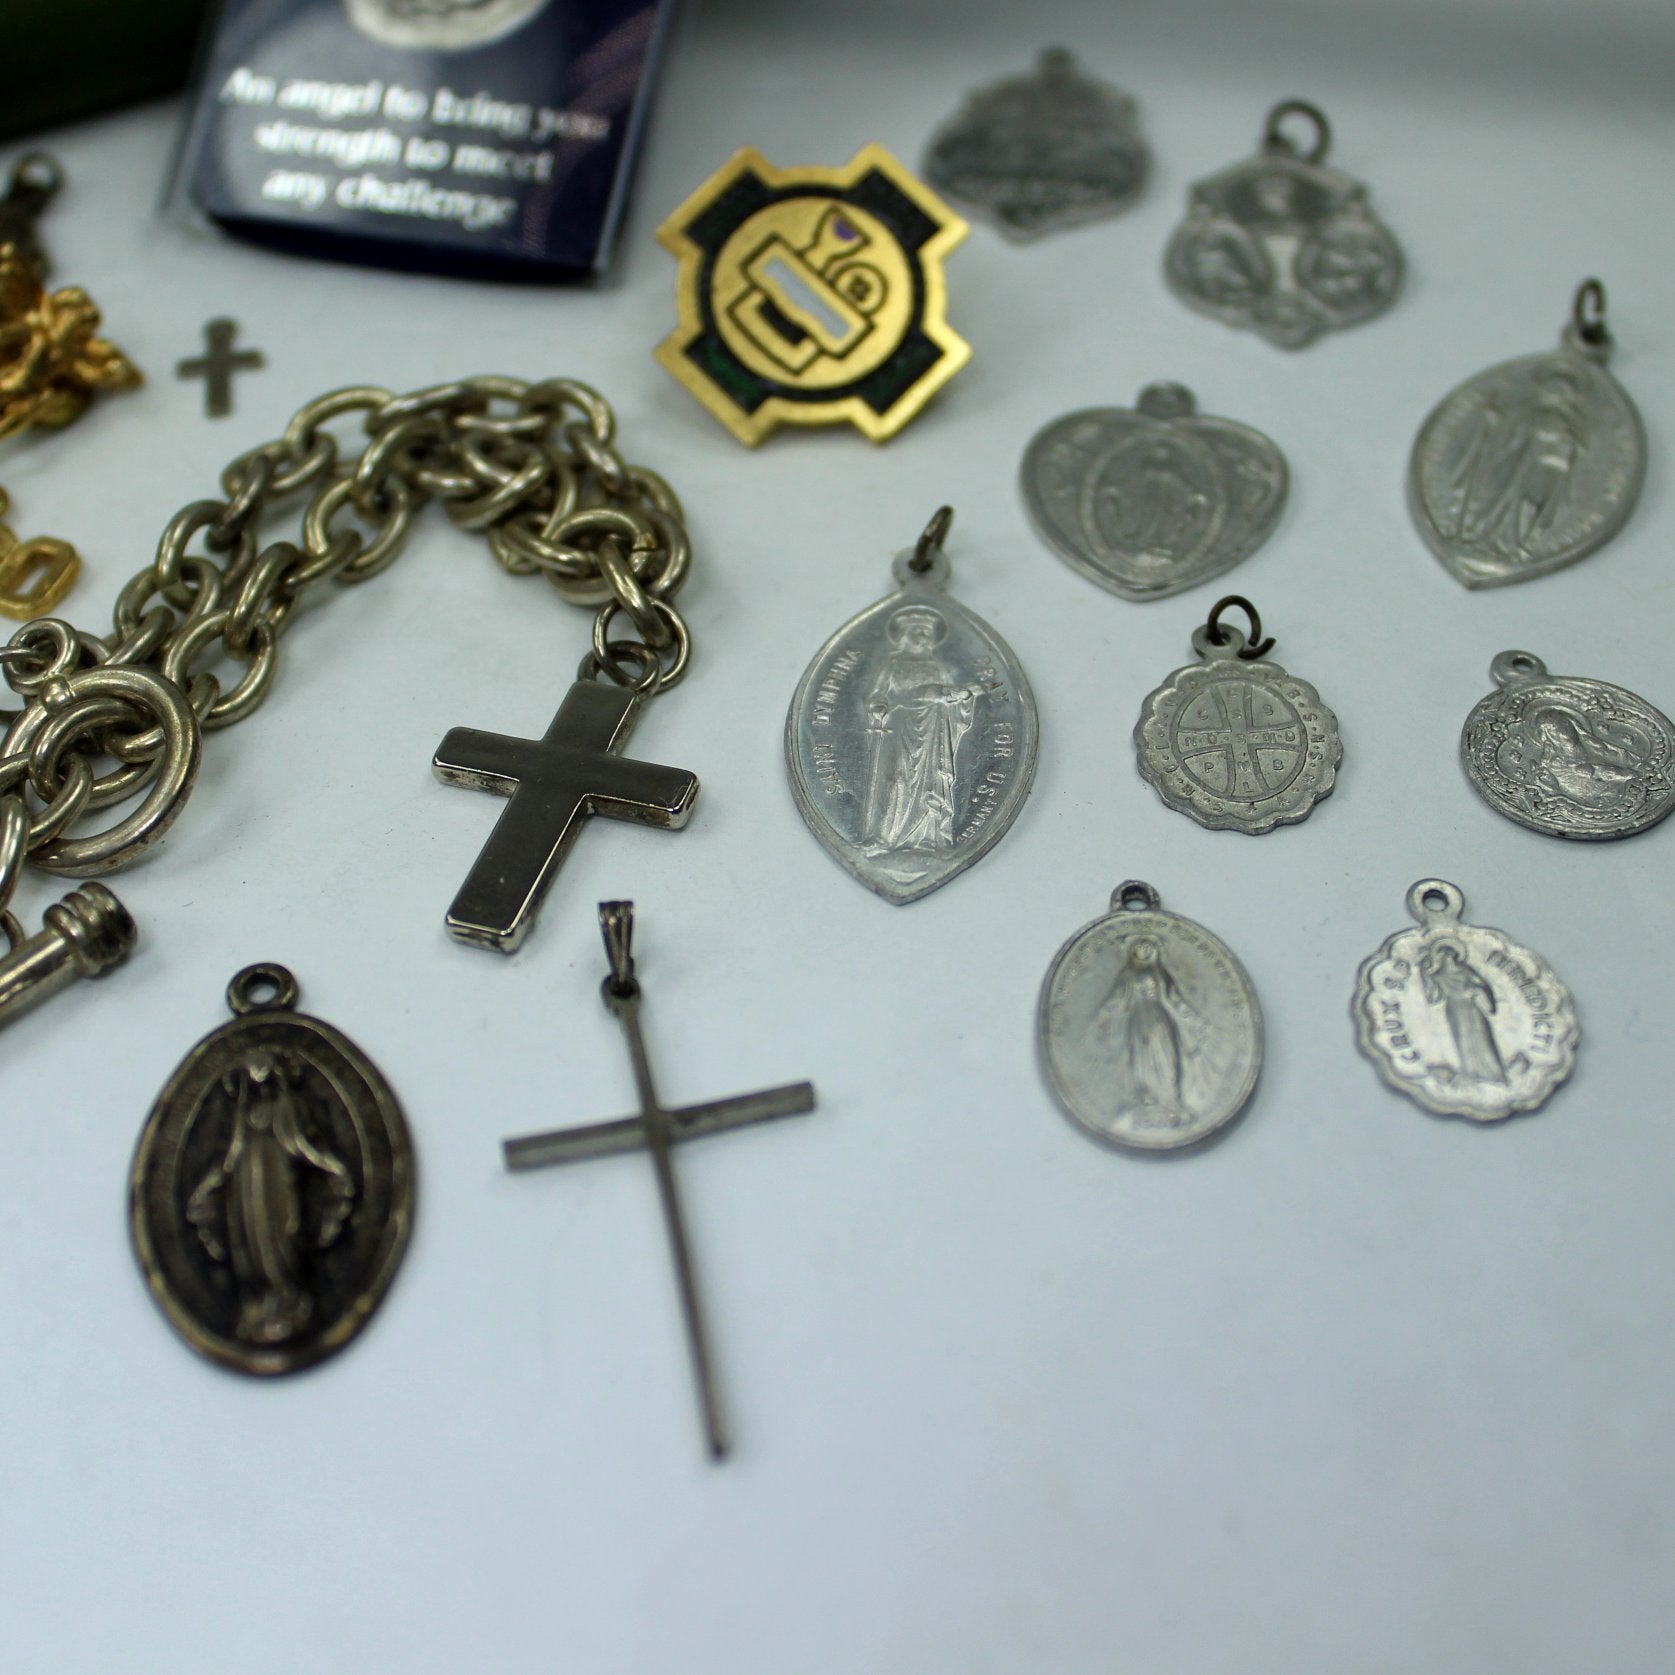 Collection 23 Religion Medals Crosses Wear DIY Jewelry Collage Repurpose closeup view medals